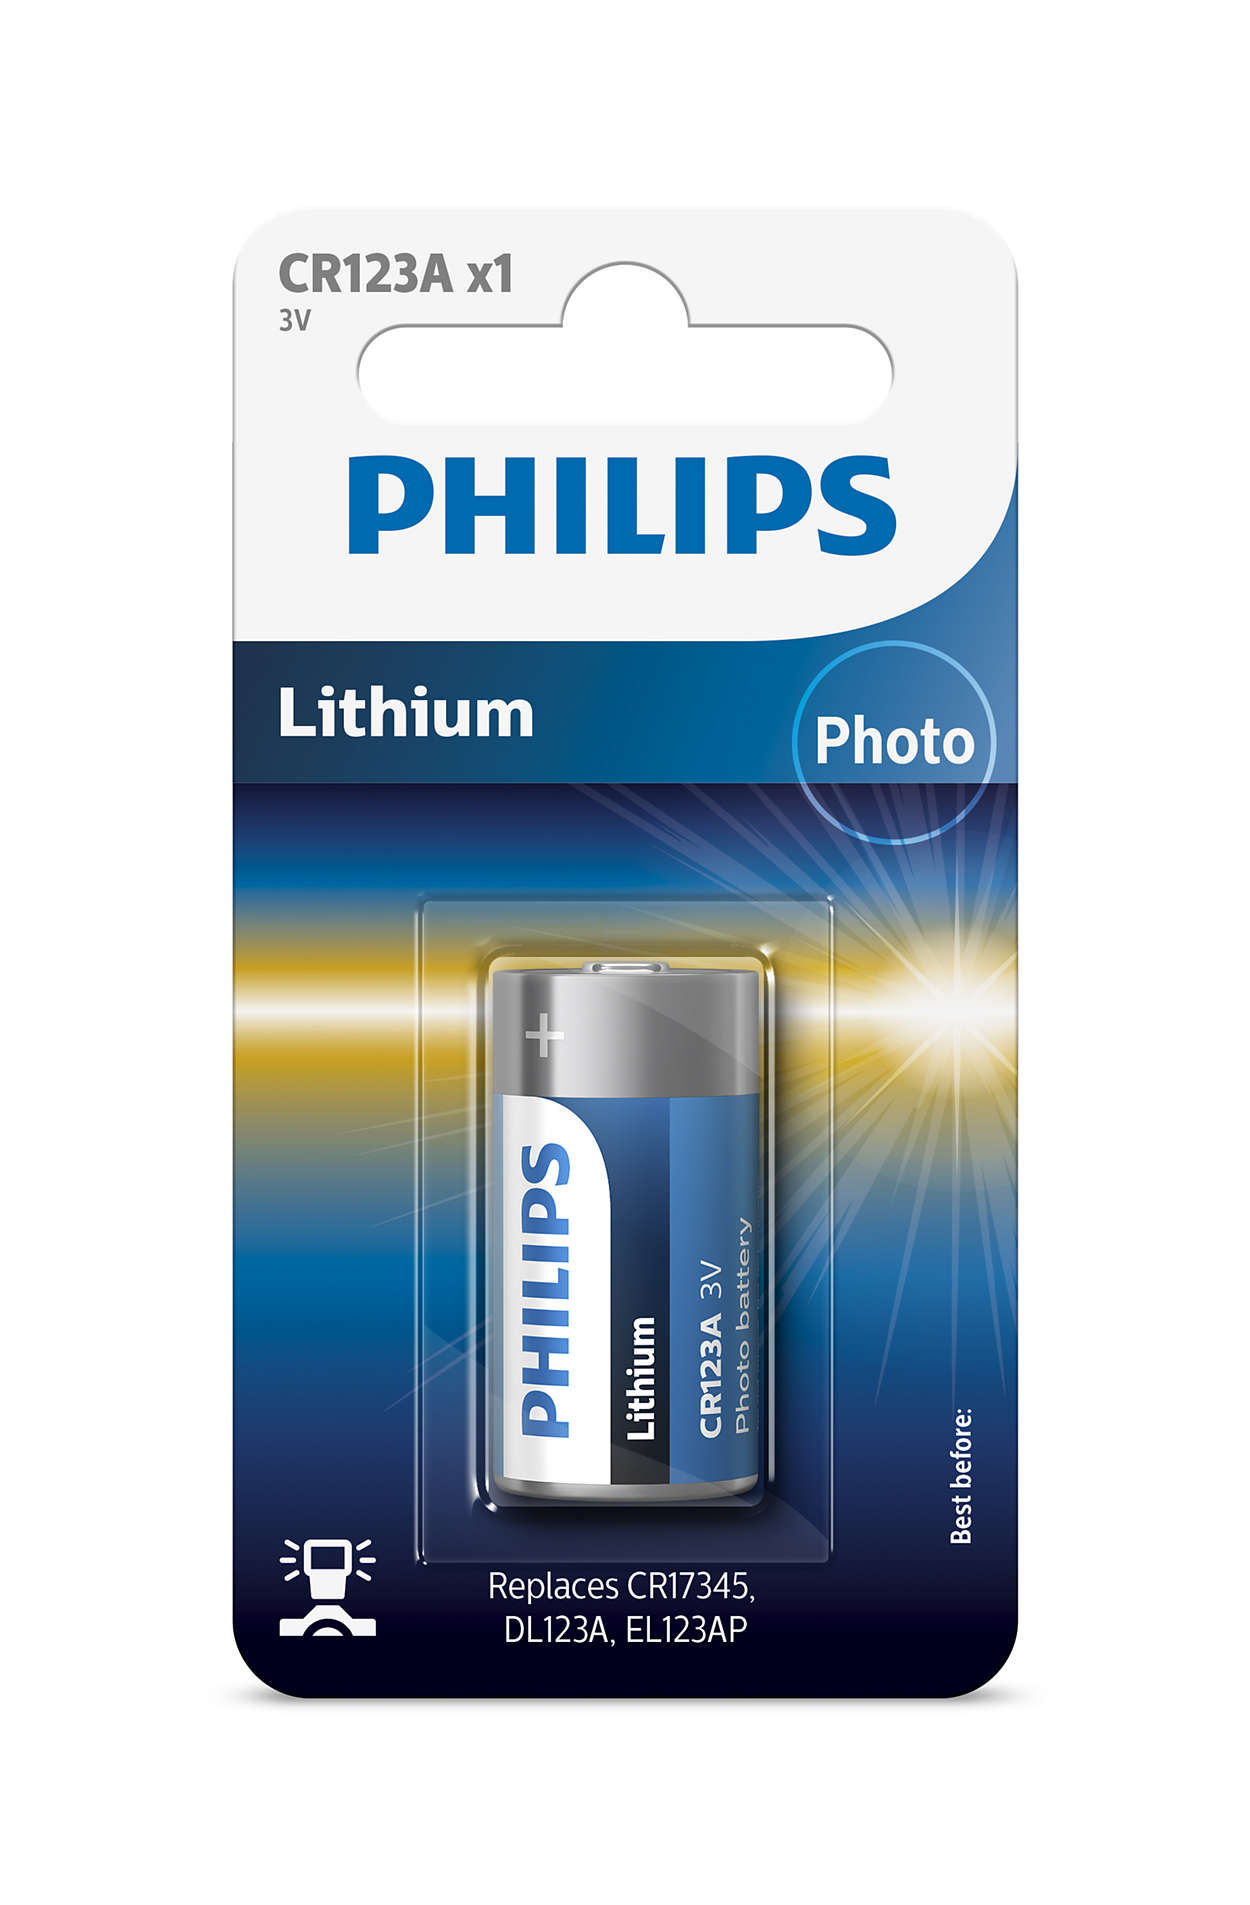 Top quality Lithium technology for your camera